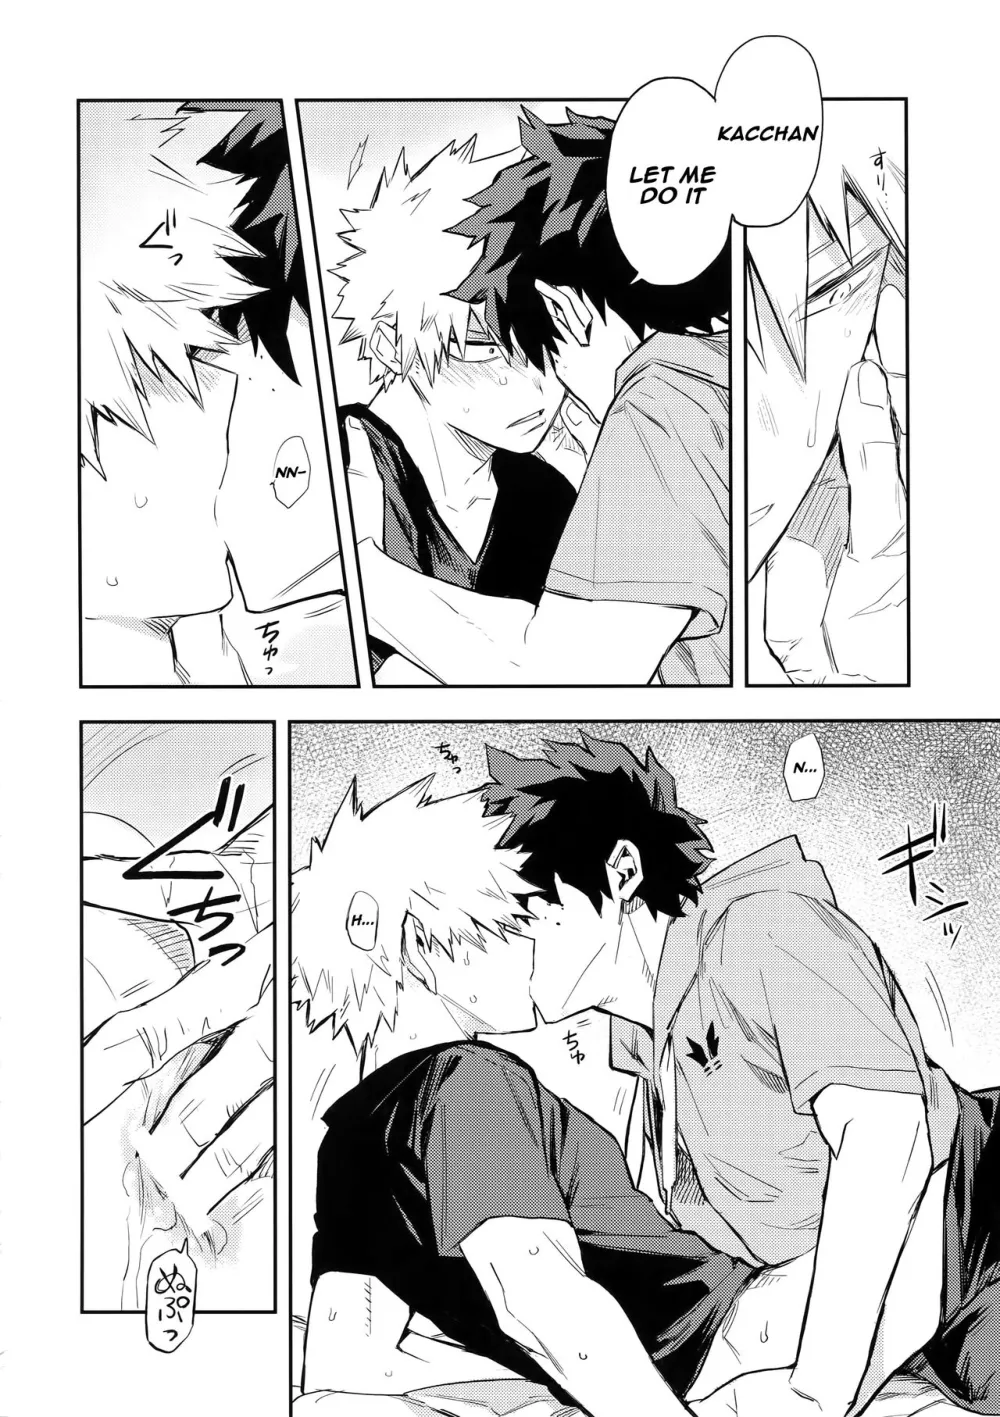 The Battle Between Sick Kacchan and Me - Page 11